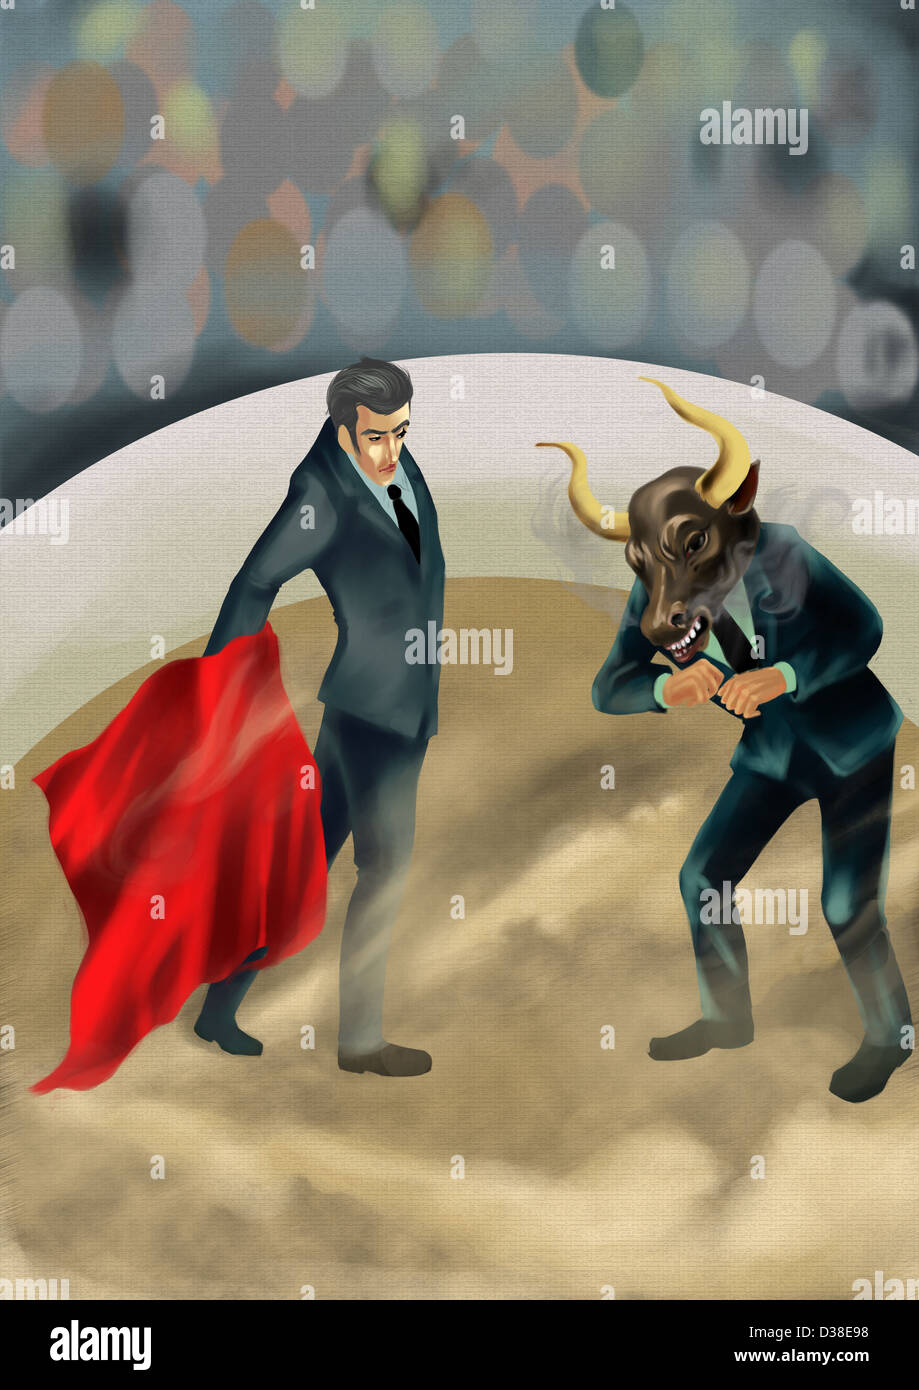 Illustrative image of businessman showing red cloth to bull Stock Photo